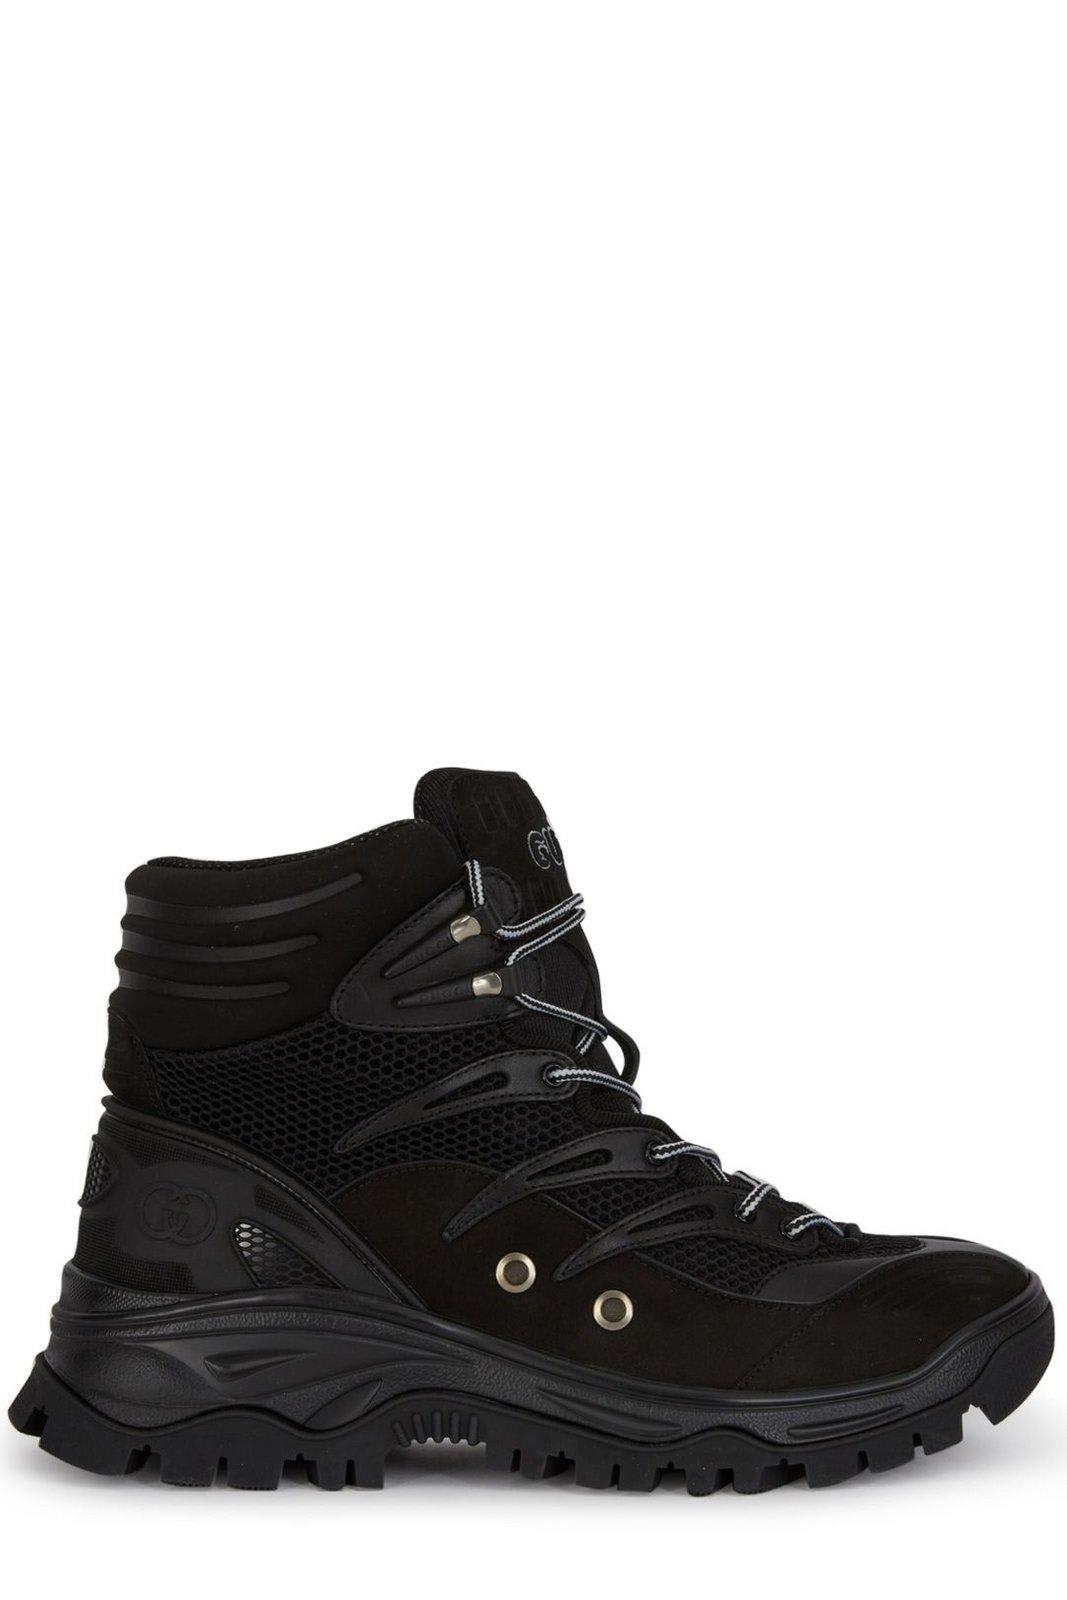 Gucci Mesh Panelled Lace-Up Boots